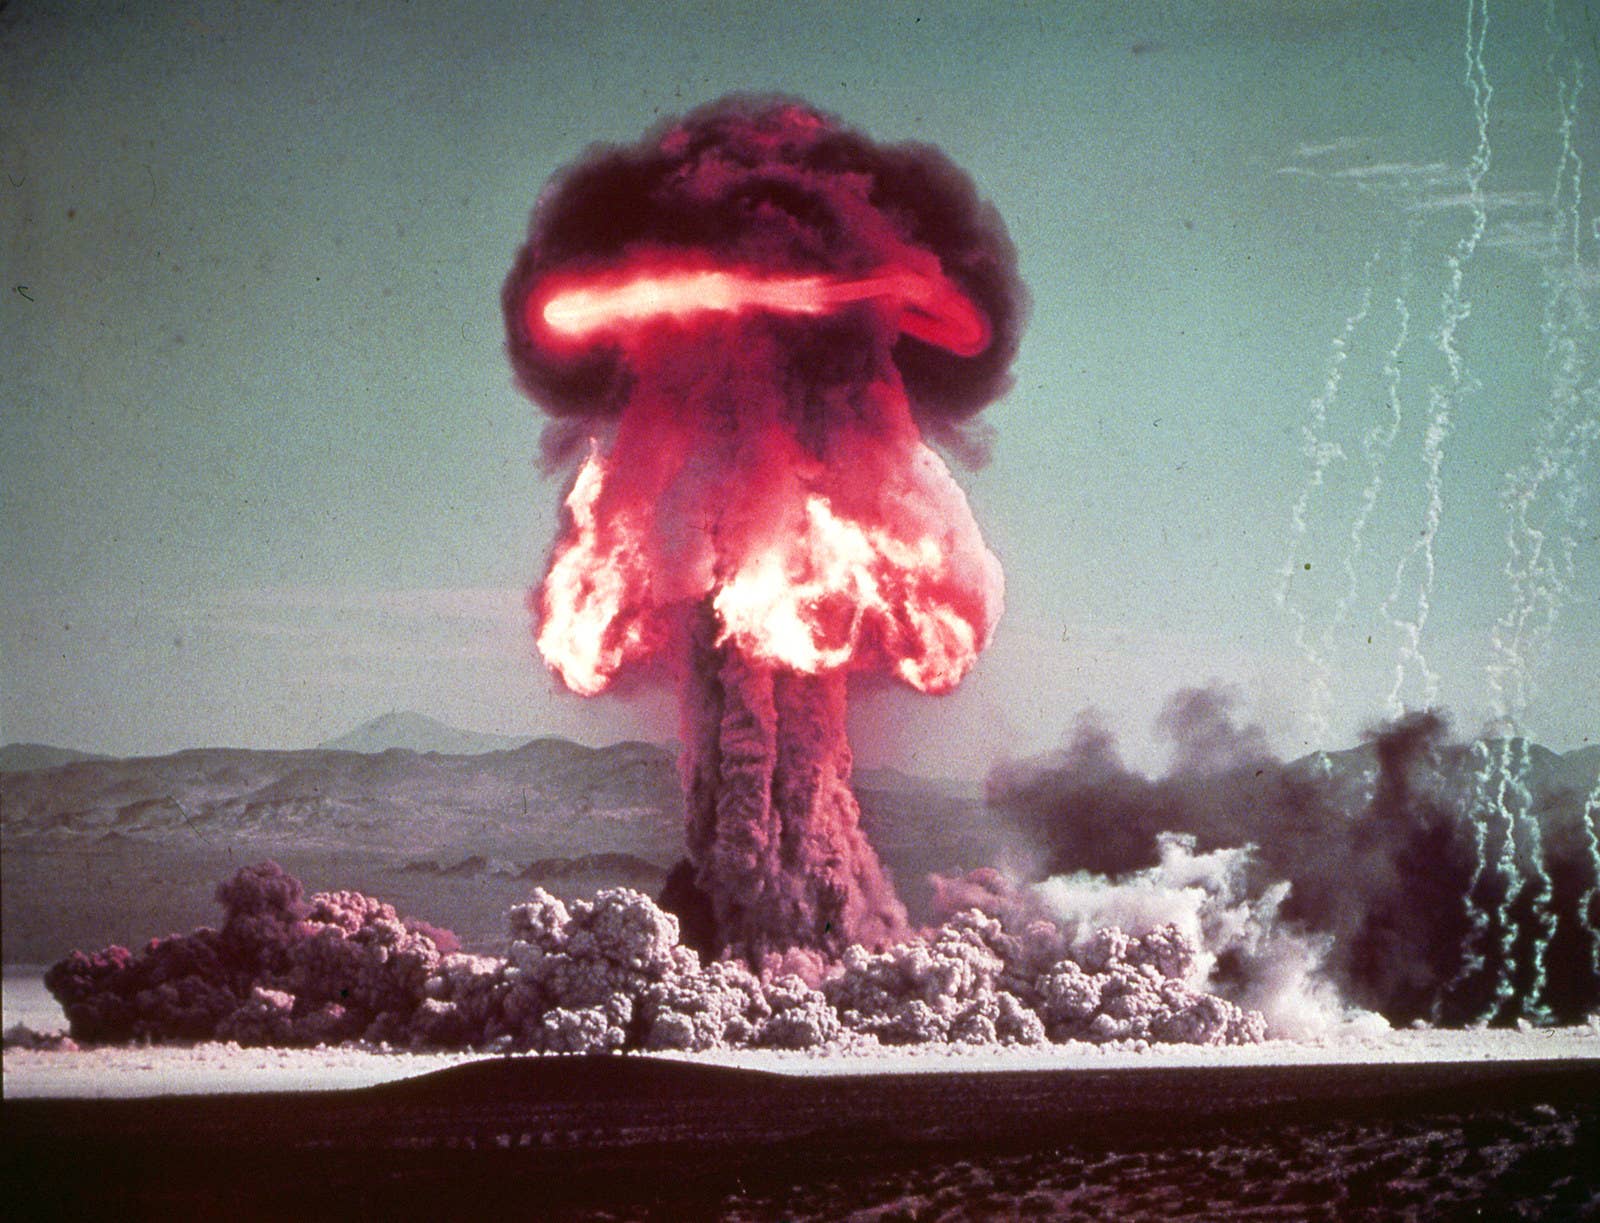 A mushroom cloud forms after the detonation of nuclear artillery shell Grable at the Nevada Proving Grounds on May 25, 1953.